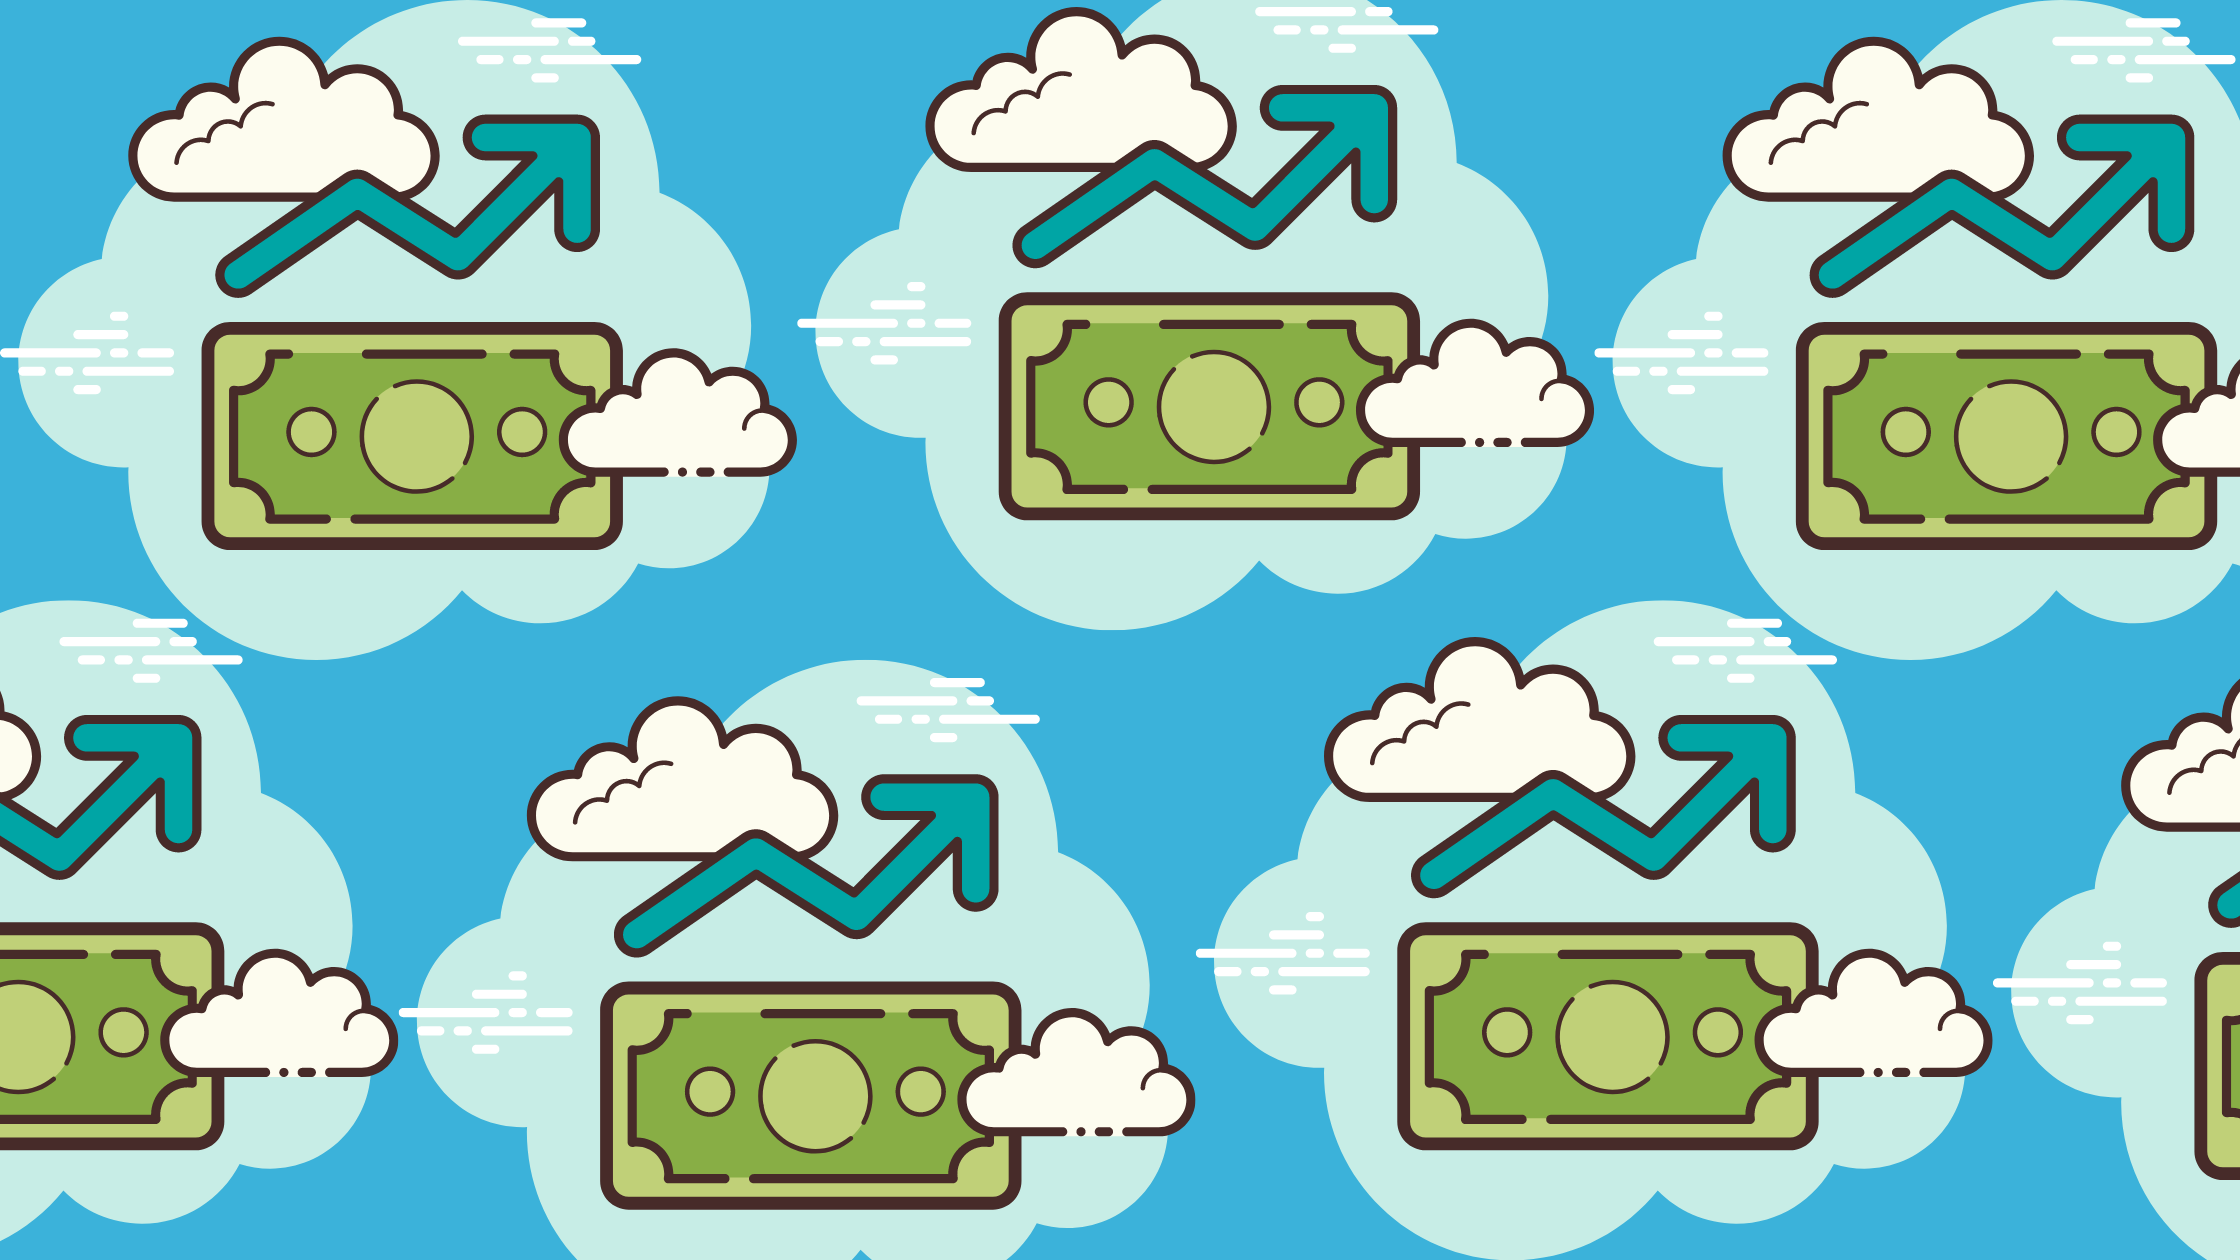 A dollar bill and a jagged arrow pointing up against a cloud background